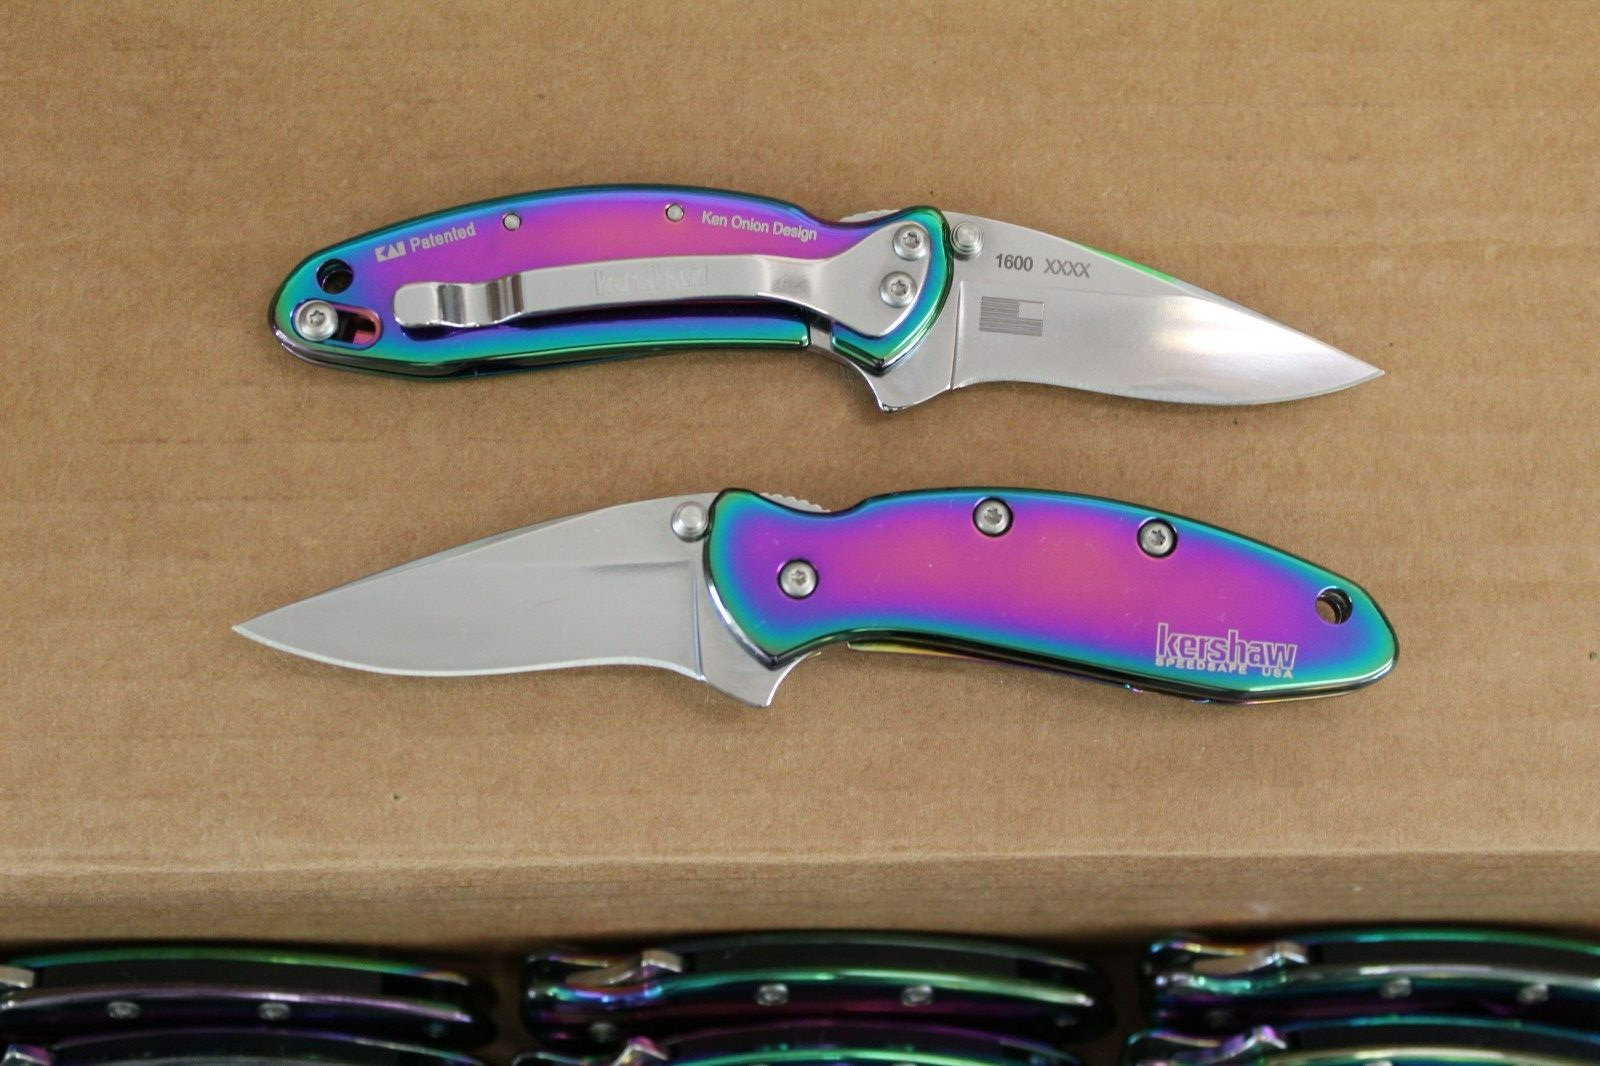 Kershaw Rainbow Chive 1600VIB, Plain Edge, Discontinued, Brand New, Factory 2nd